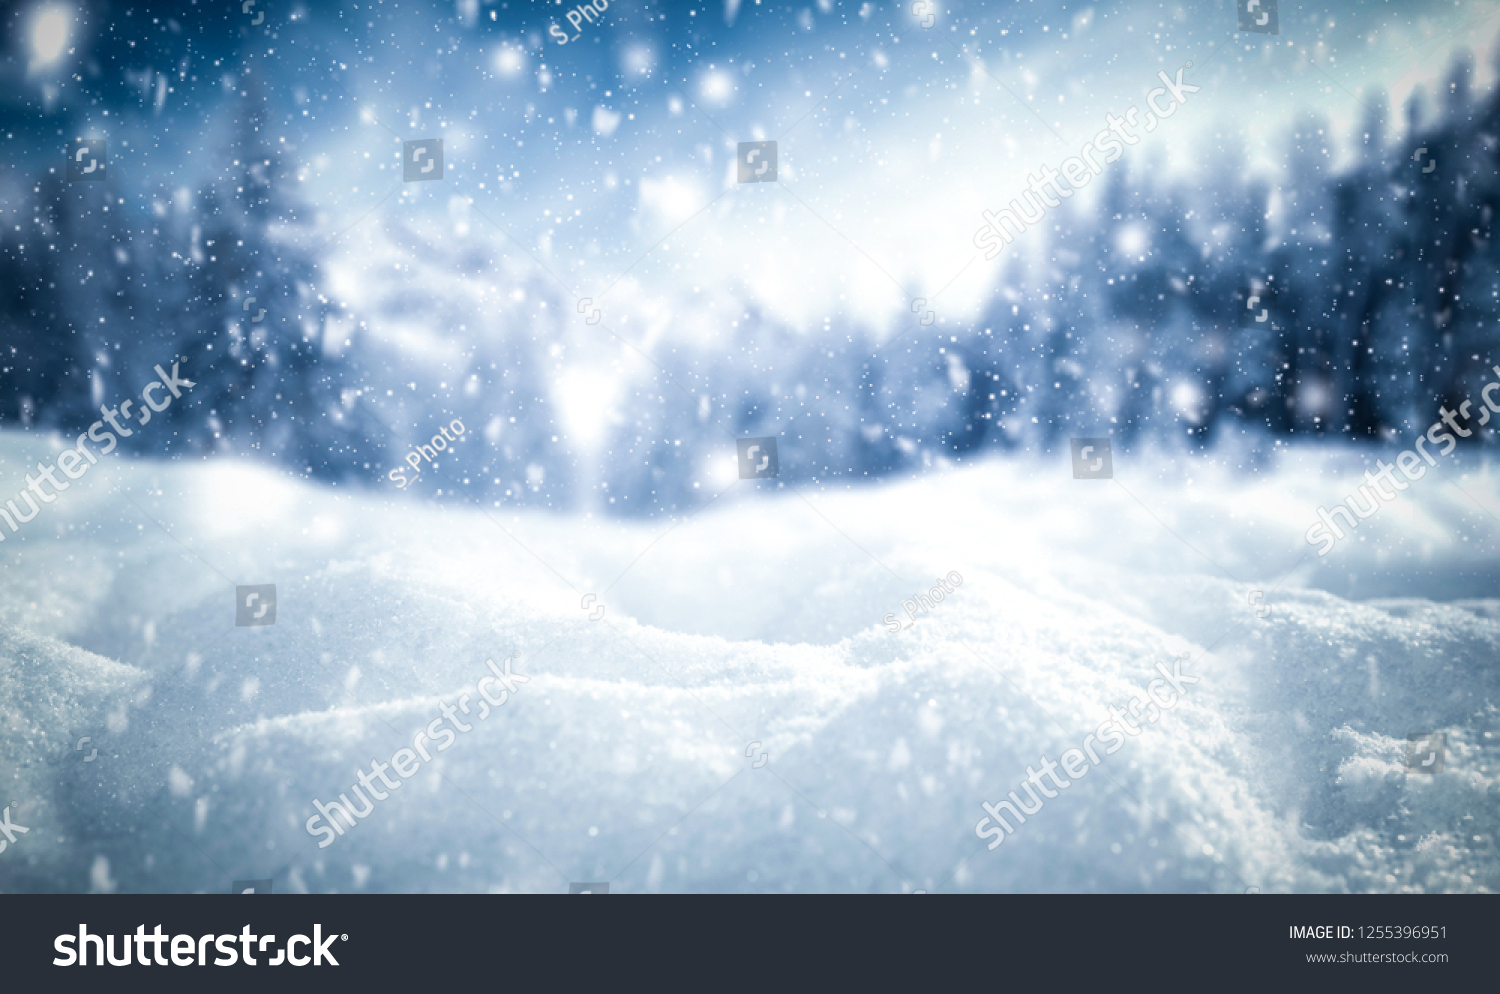 Winter background of snow and frost with free space for your decoration  #1255396951